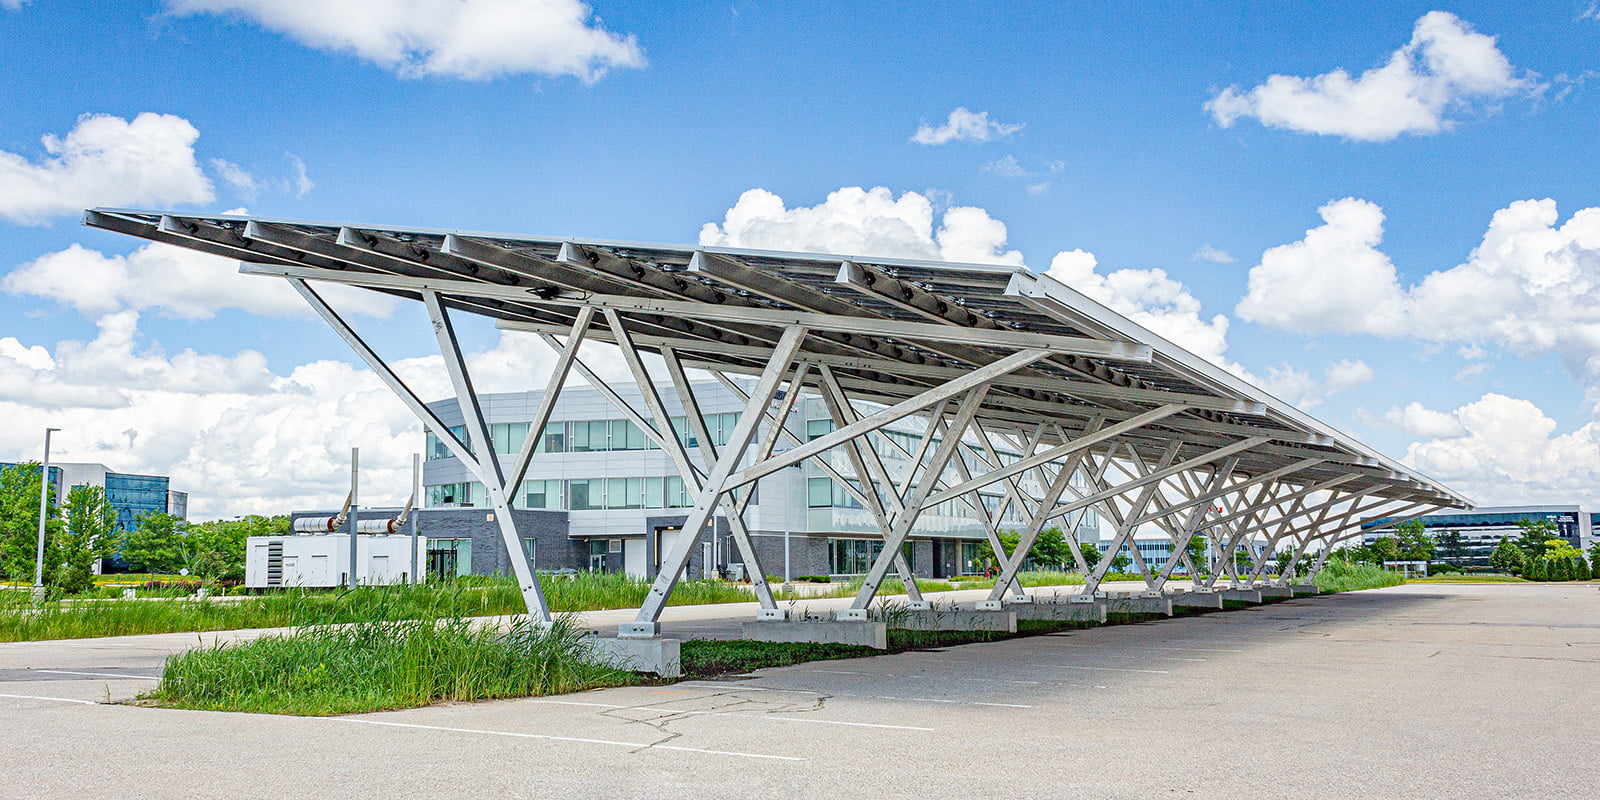 Dramatic photo of an aluminum solar carport at midday. Sky is fair-weather with white clouds. Shot in a parking lot with lush grass verges in the background